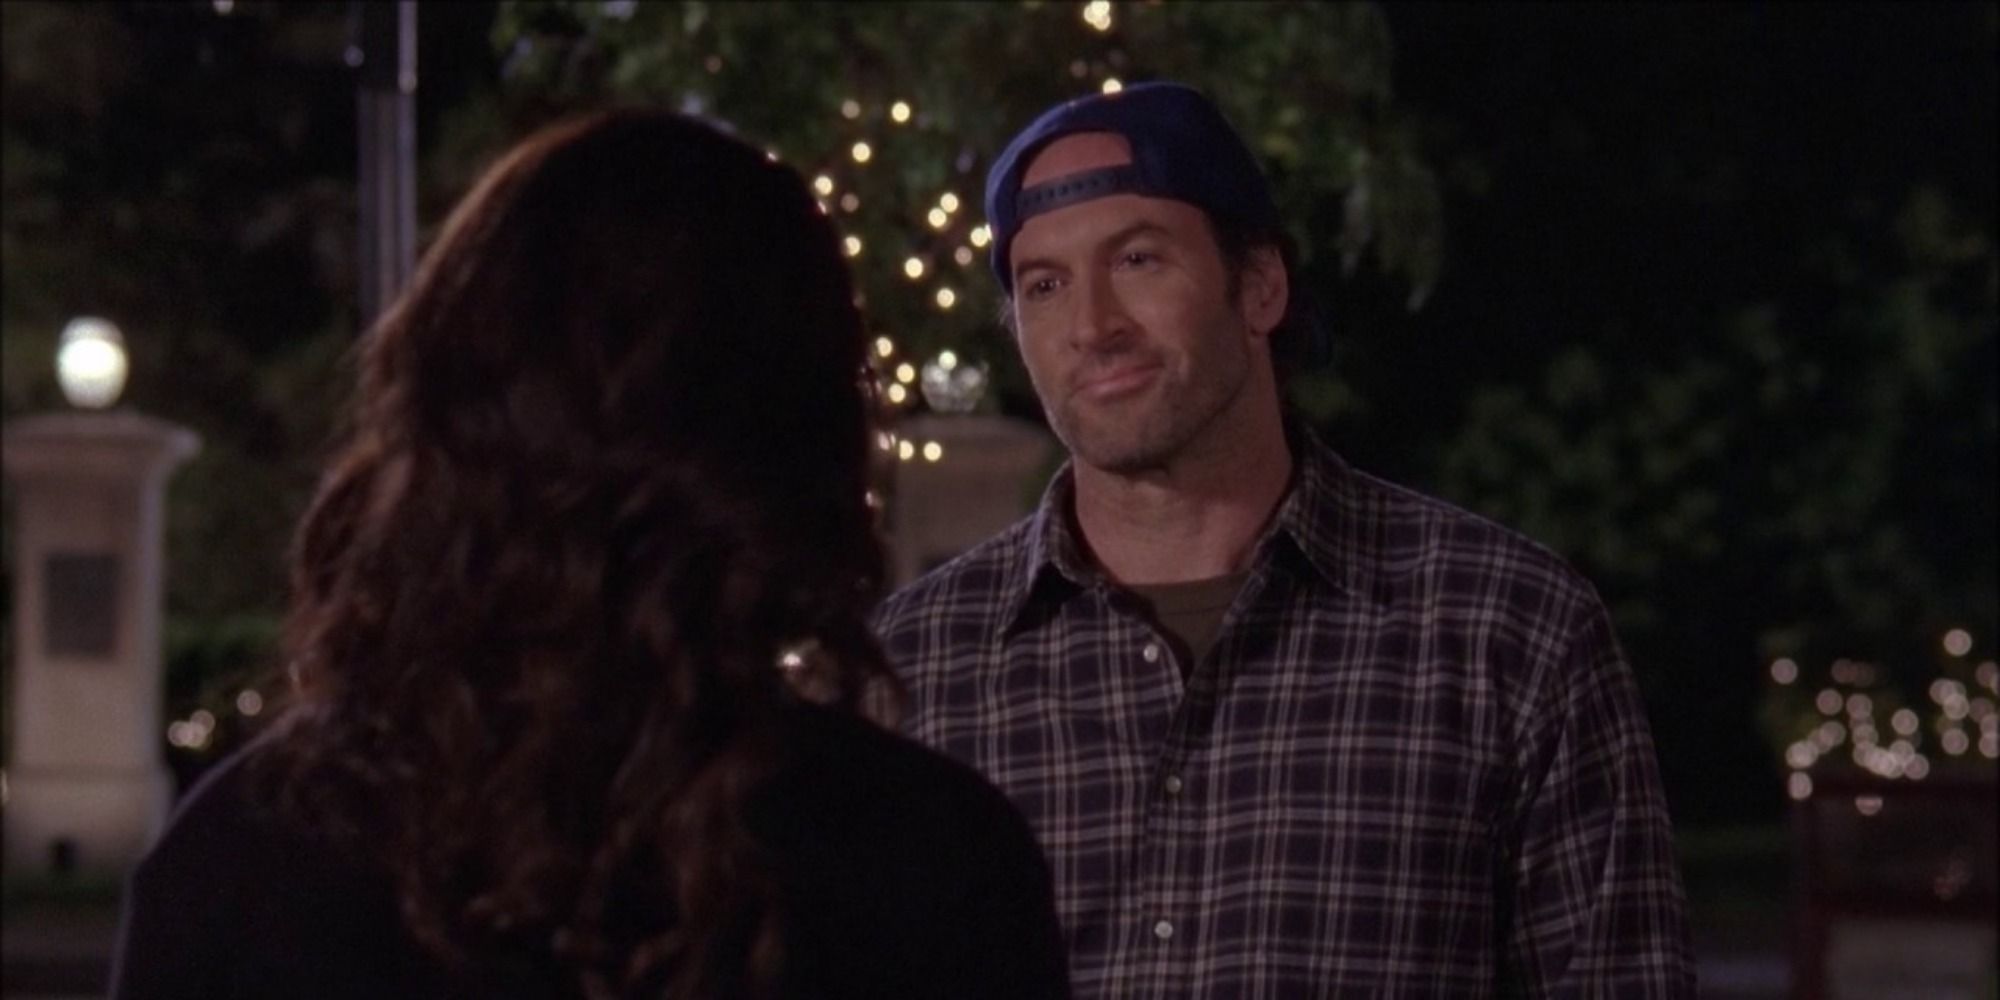 Lorelai Luke get together for good and kiss at the end of Gilmore Girls finale Bon Voyage